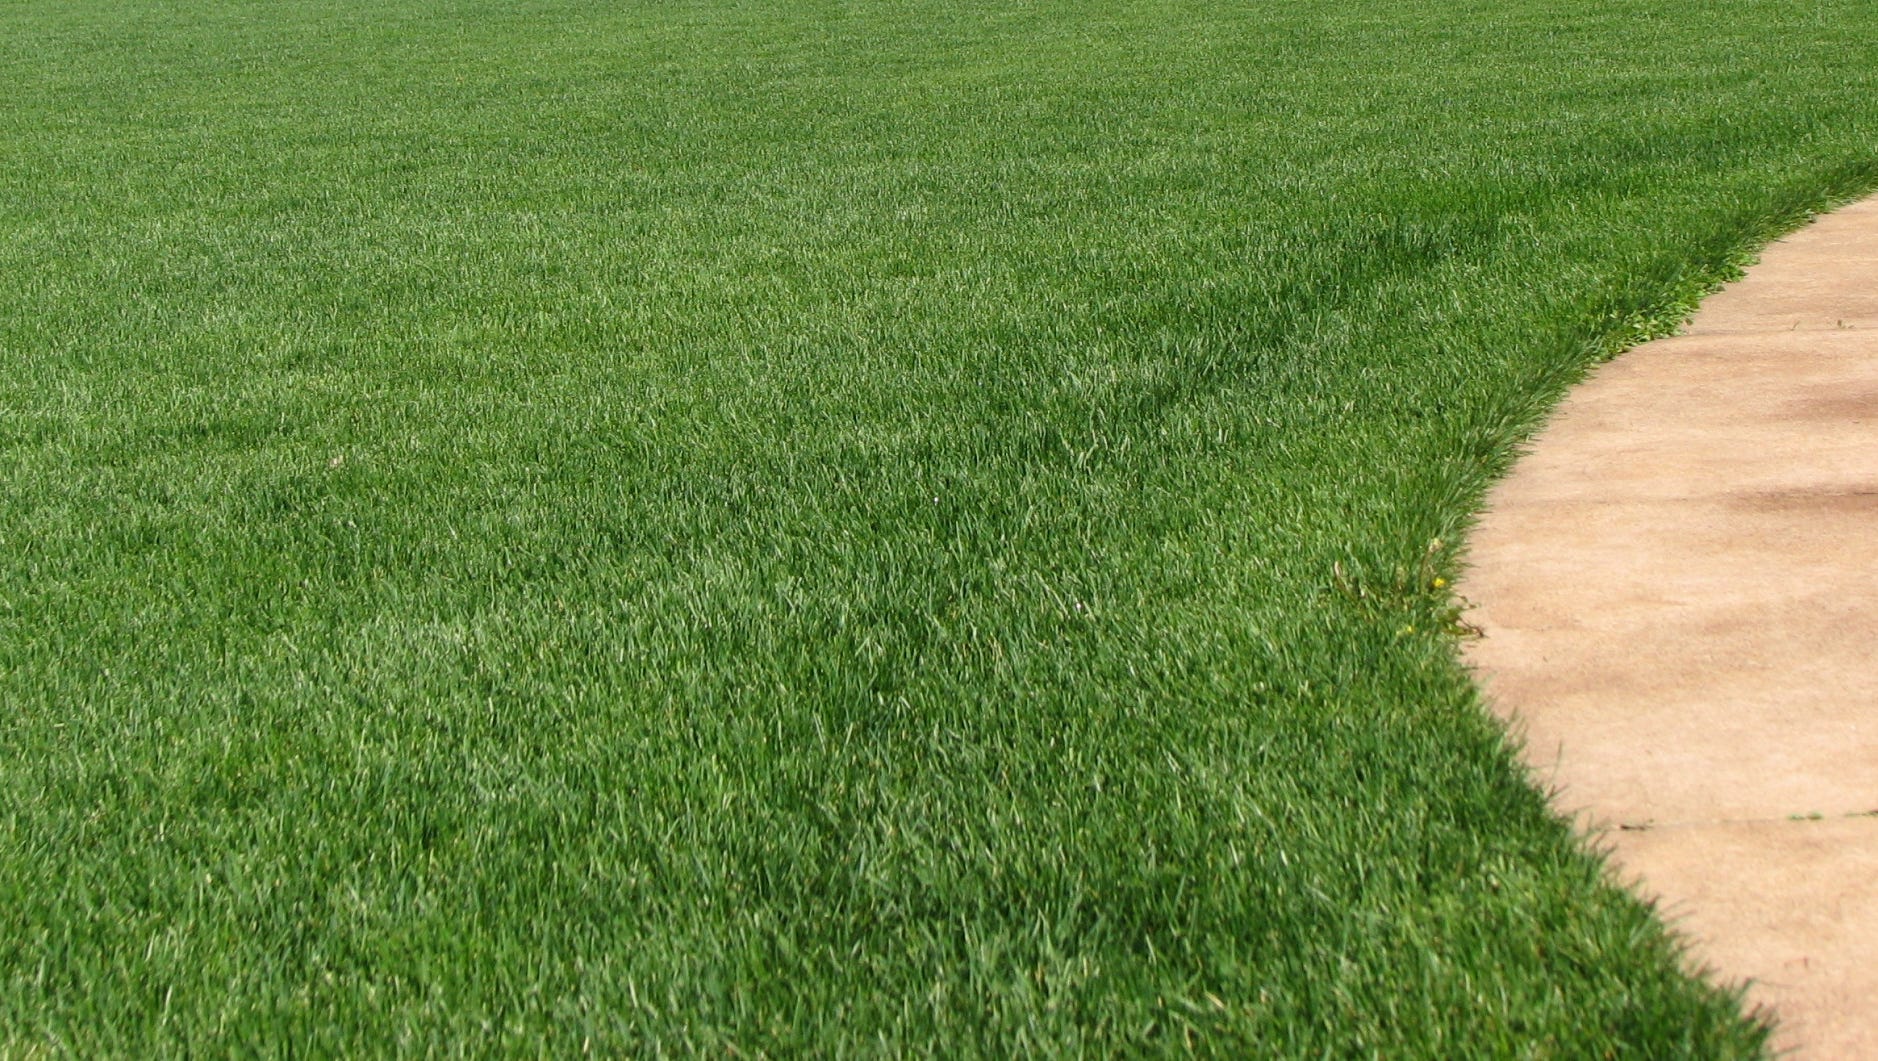 Spring lawn care: Reseeding tips to fix bare spots, thin grass stands